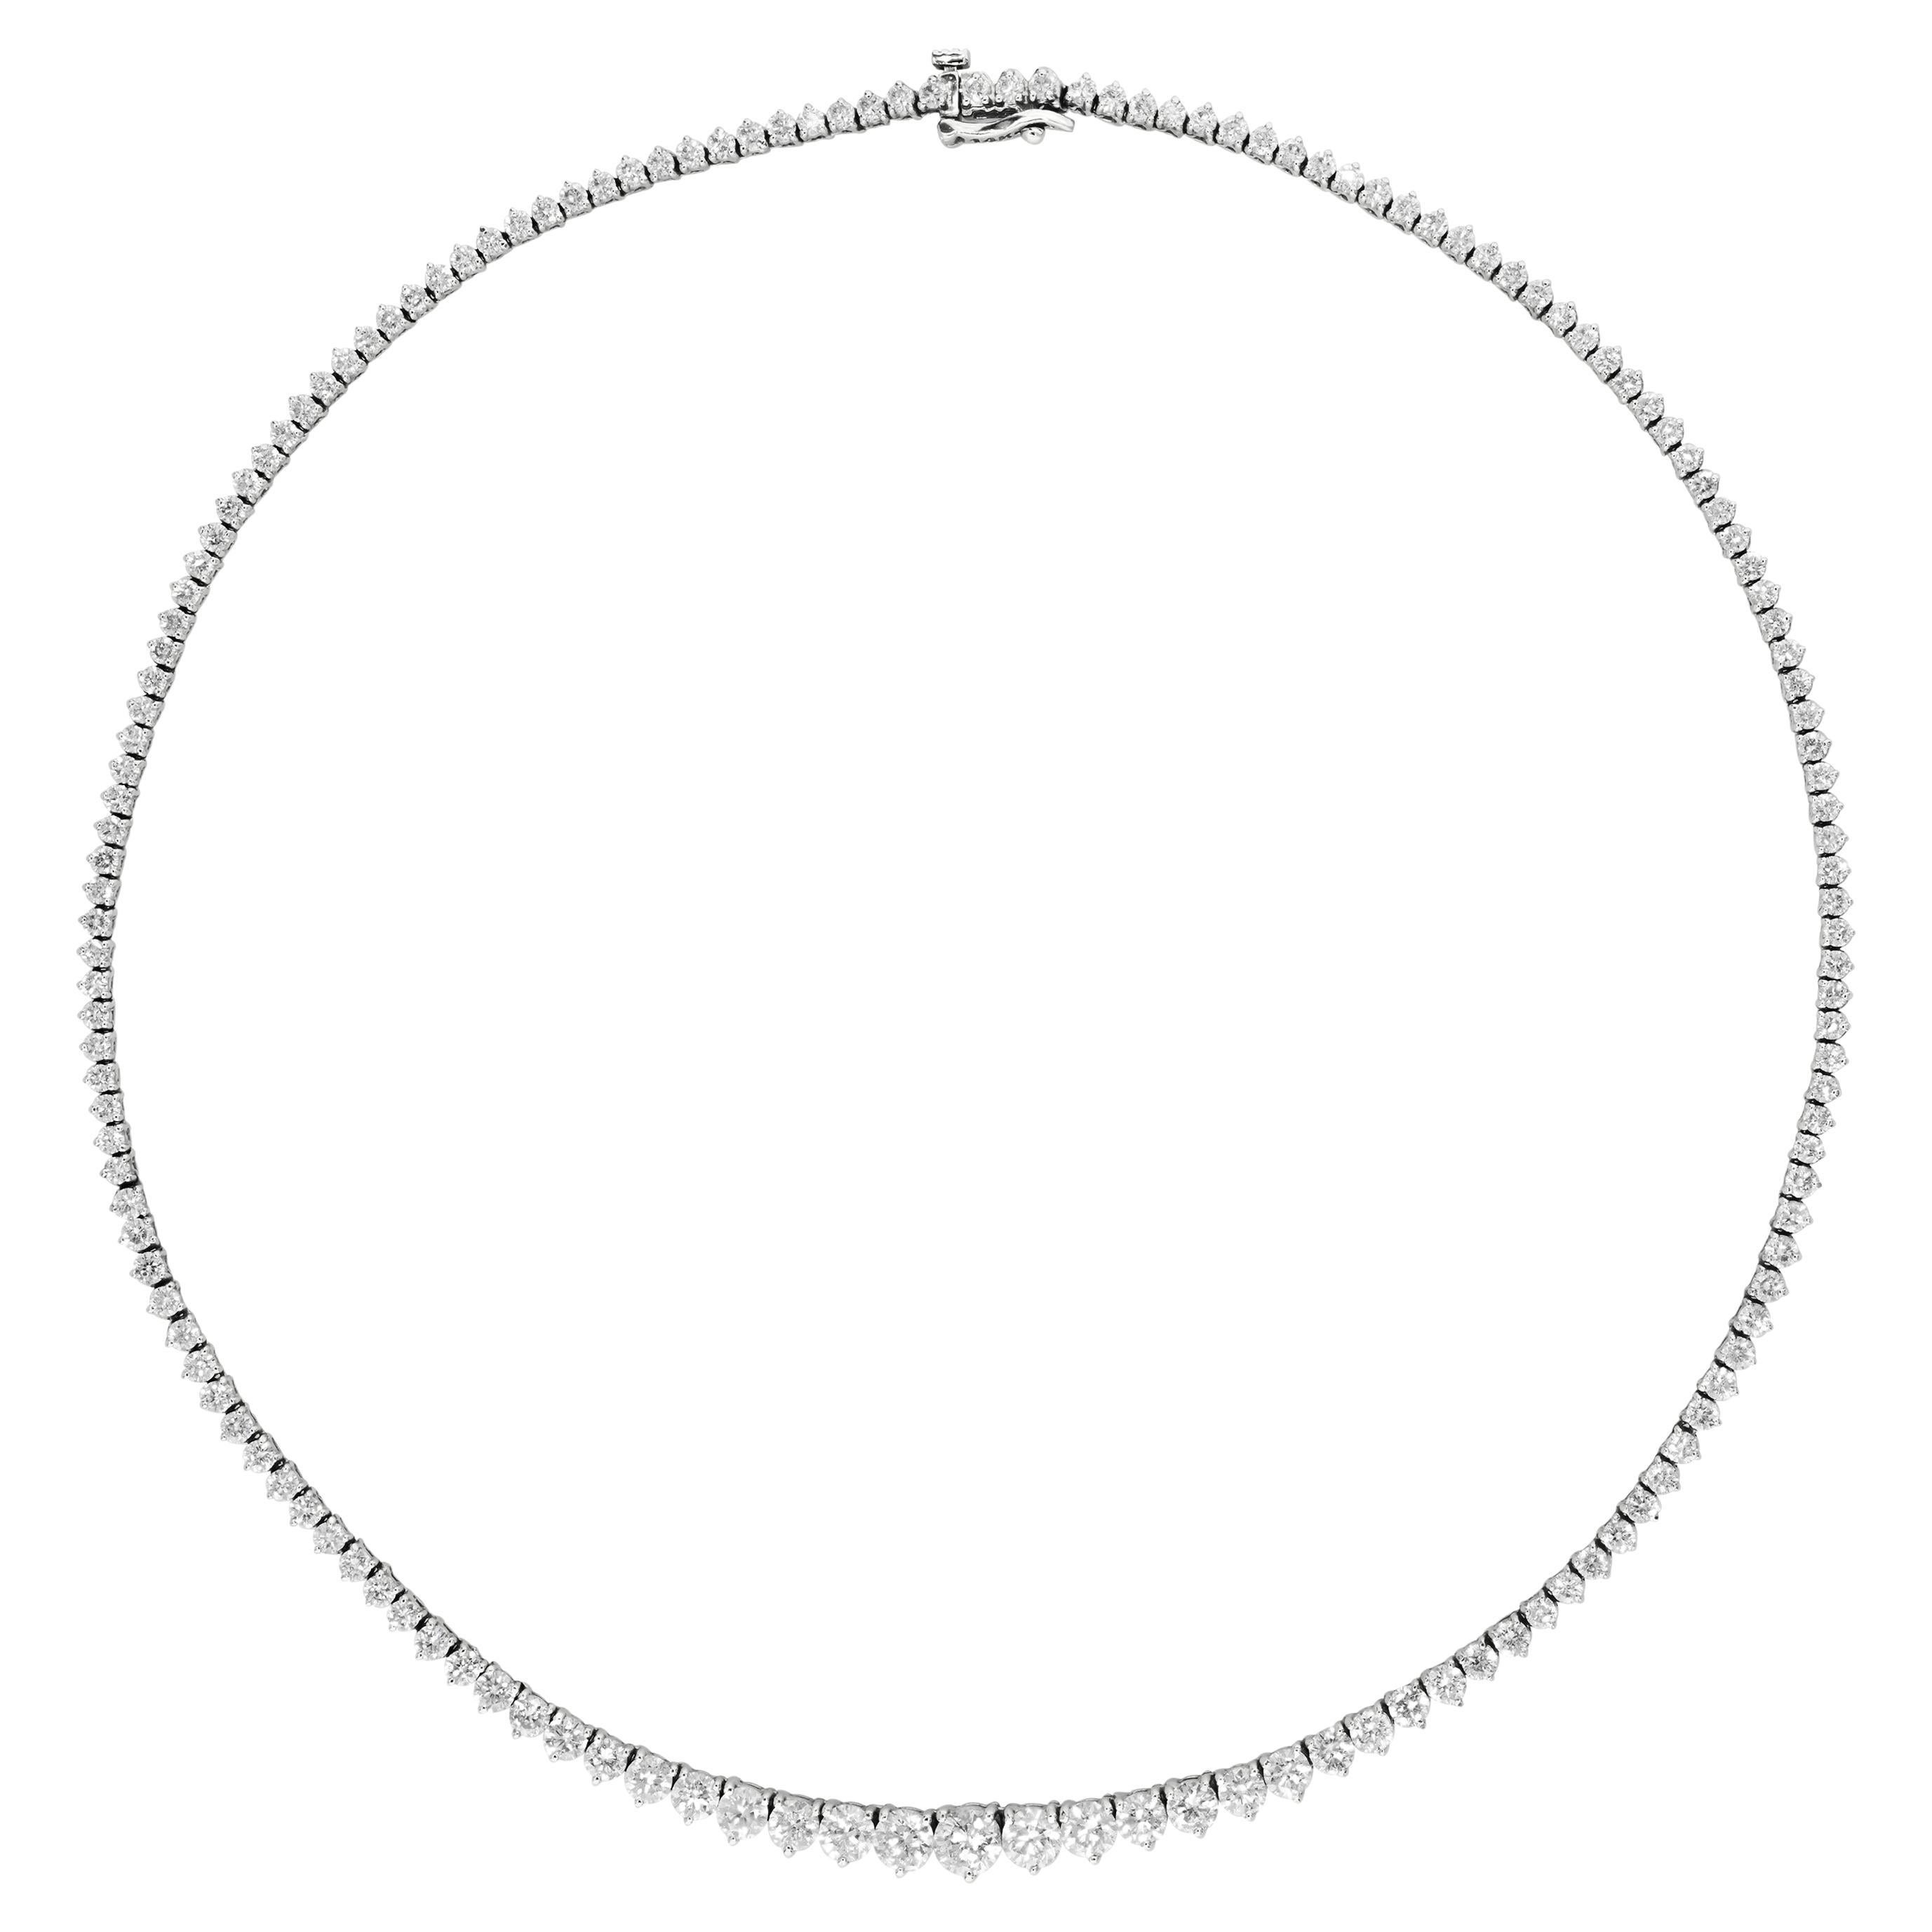 5.34 Carat Graduated Round Diamond Necklace in 14k White Gold ref103 For Sale